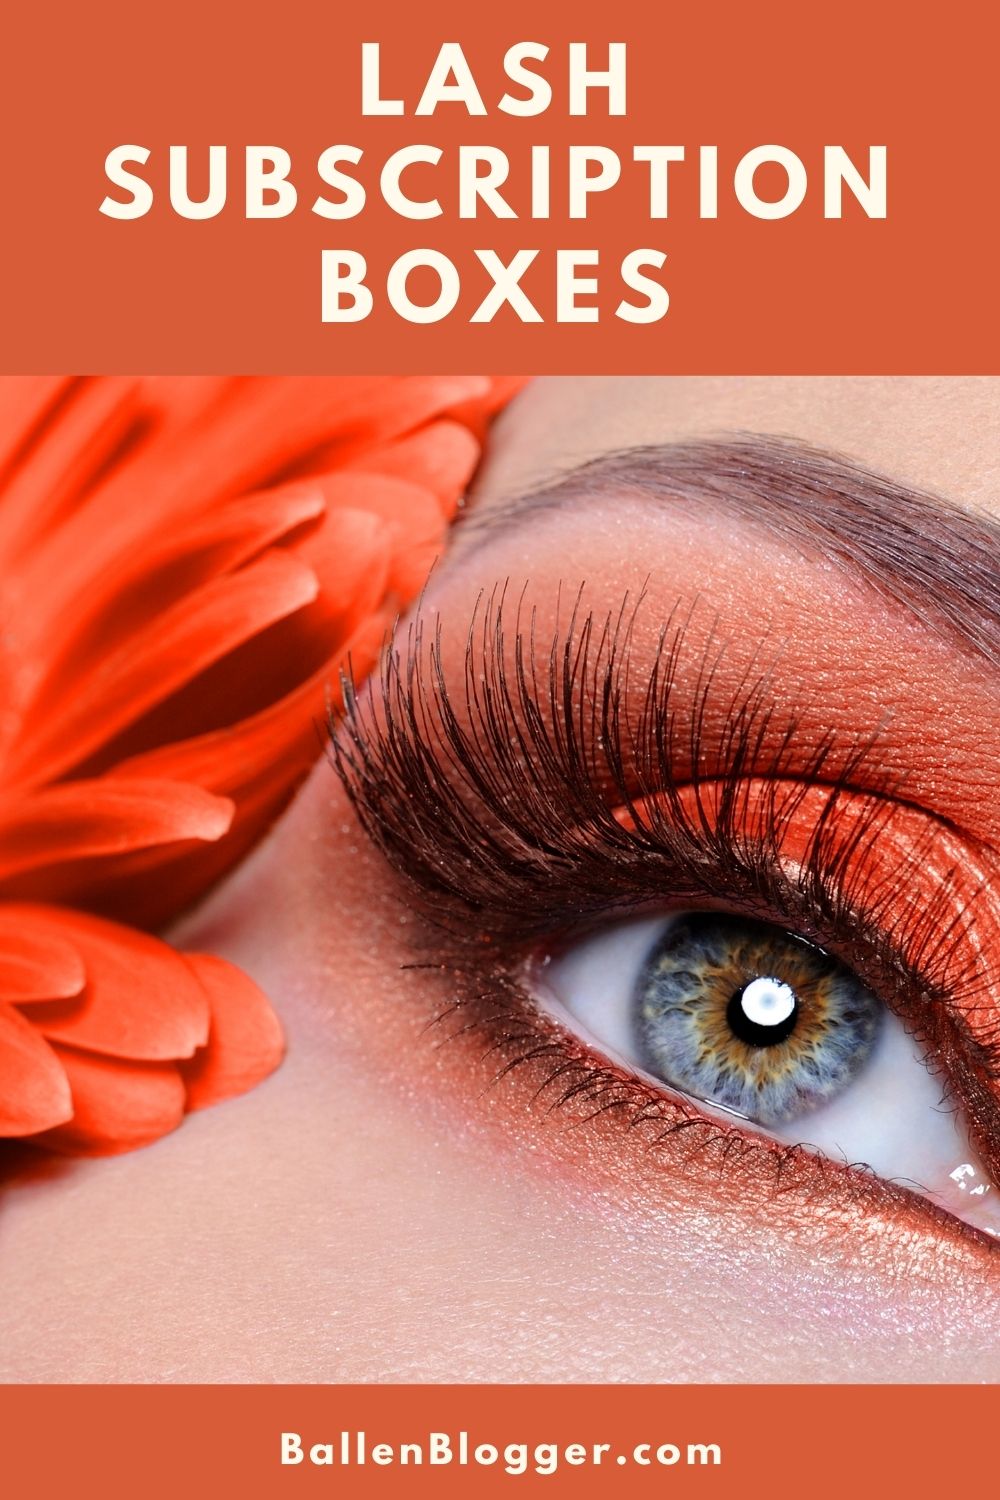 Get your lashes delivered to your front doorstep. Each box comes in various sizes, prices, and delivery options. If you are as excited about magnetic lashes as I am, be sure to check out MoxieLash Magnetic Lashes! 